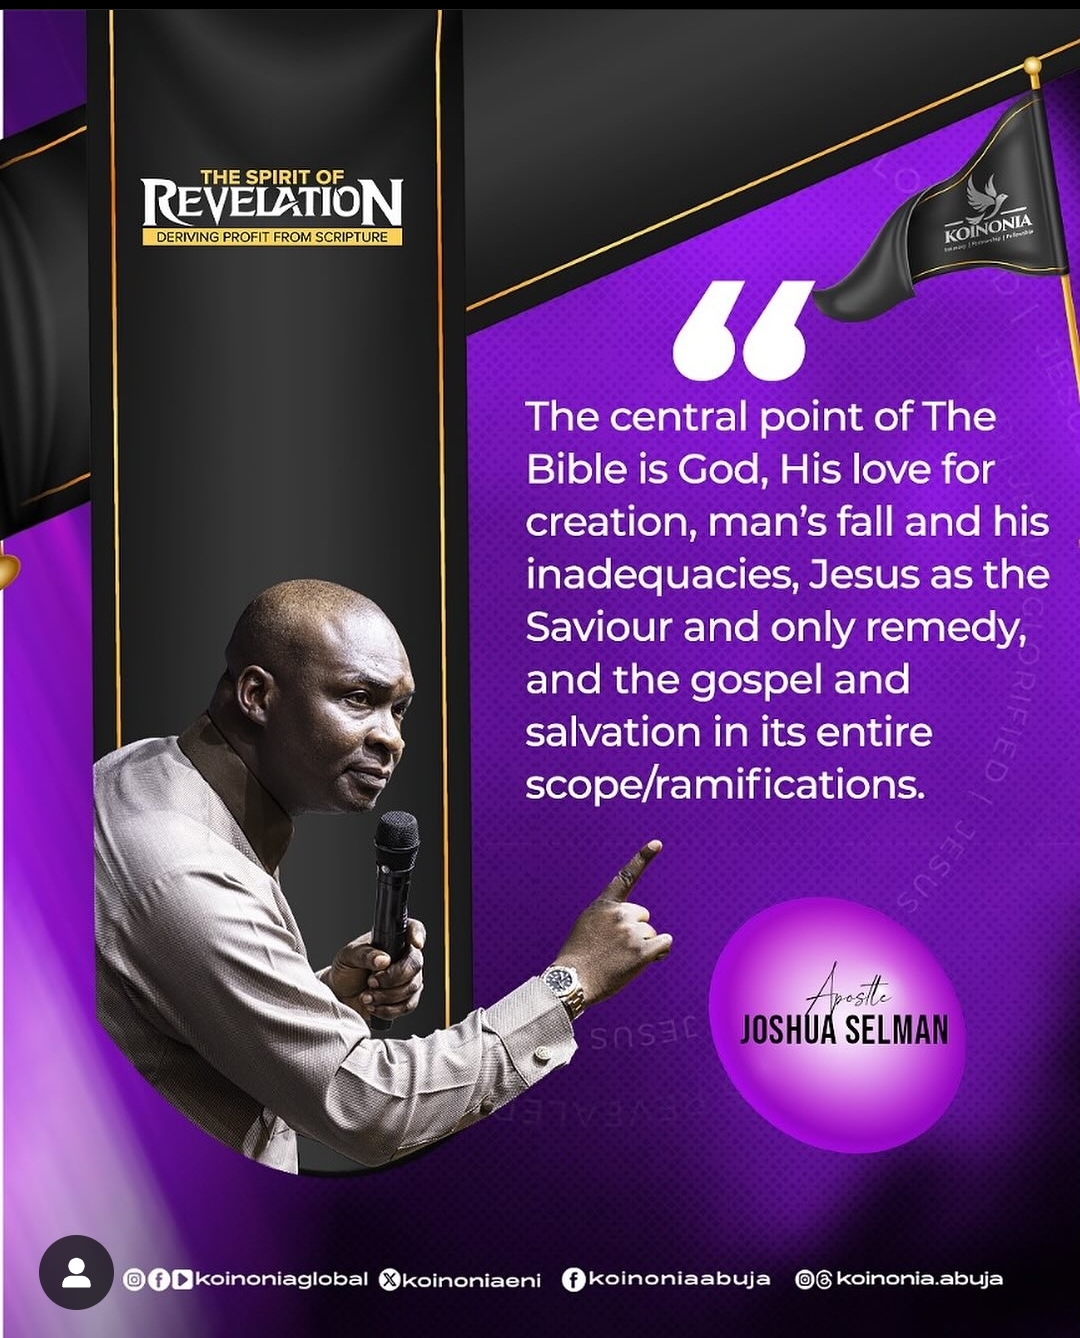 DOWNLOAD MP3: THE SPIRIT OF REVELATION: DERIVING PROFIT FROM SCRIPTURE BY Apostle Joshua Selman 3